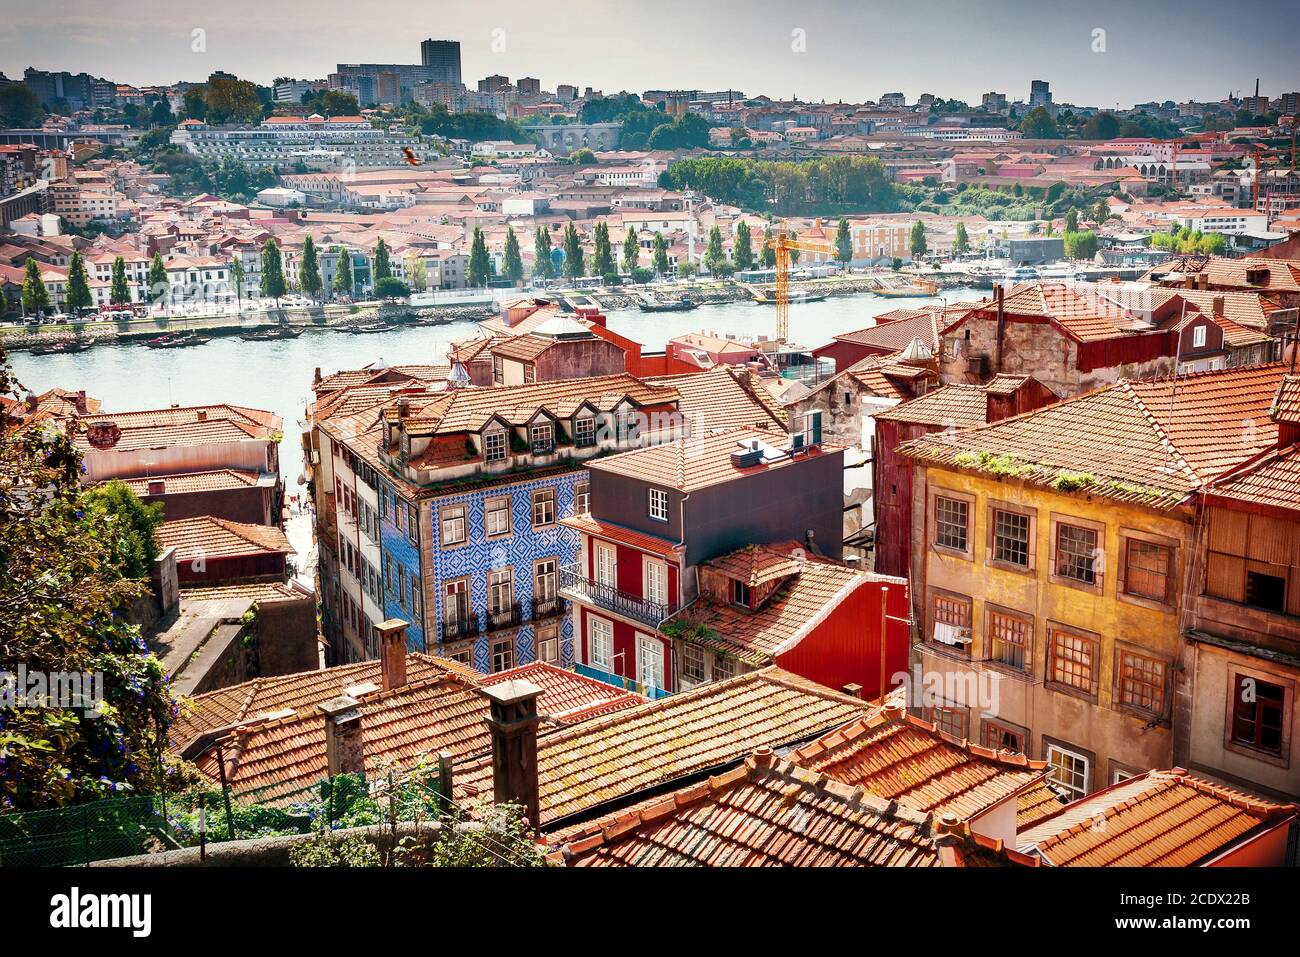 View of Porto's old town houses, the Douro river and the Port wine warehouses Stock Photo